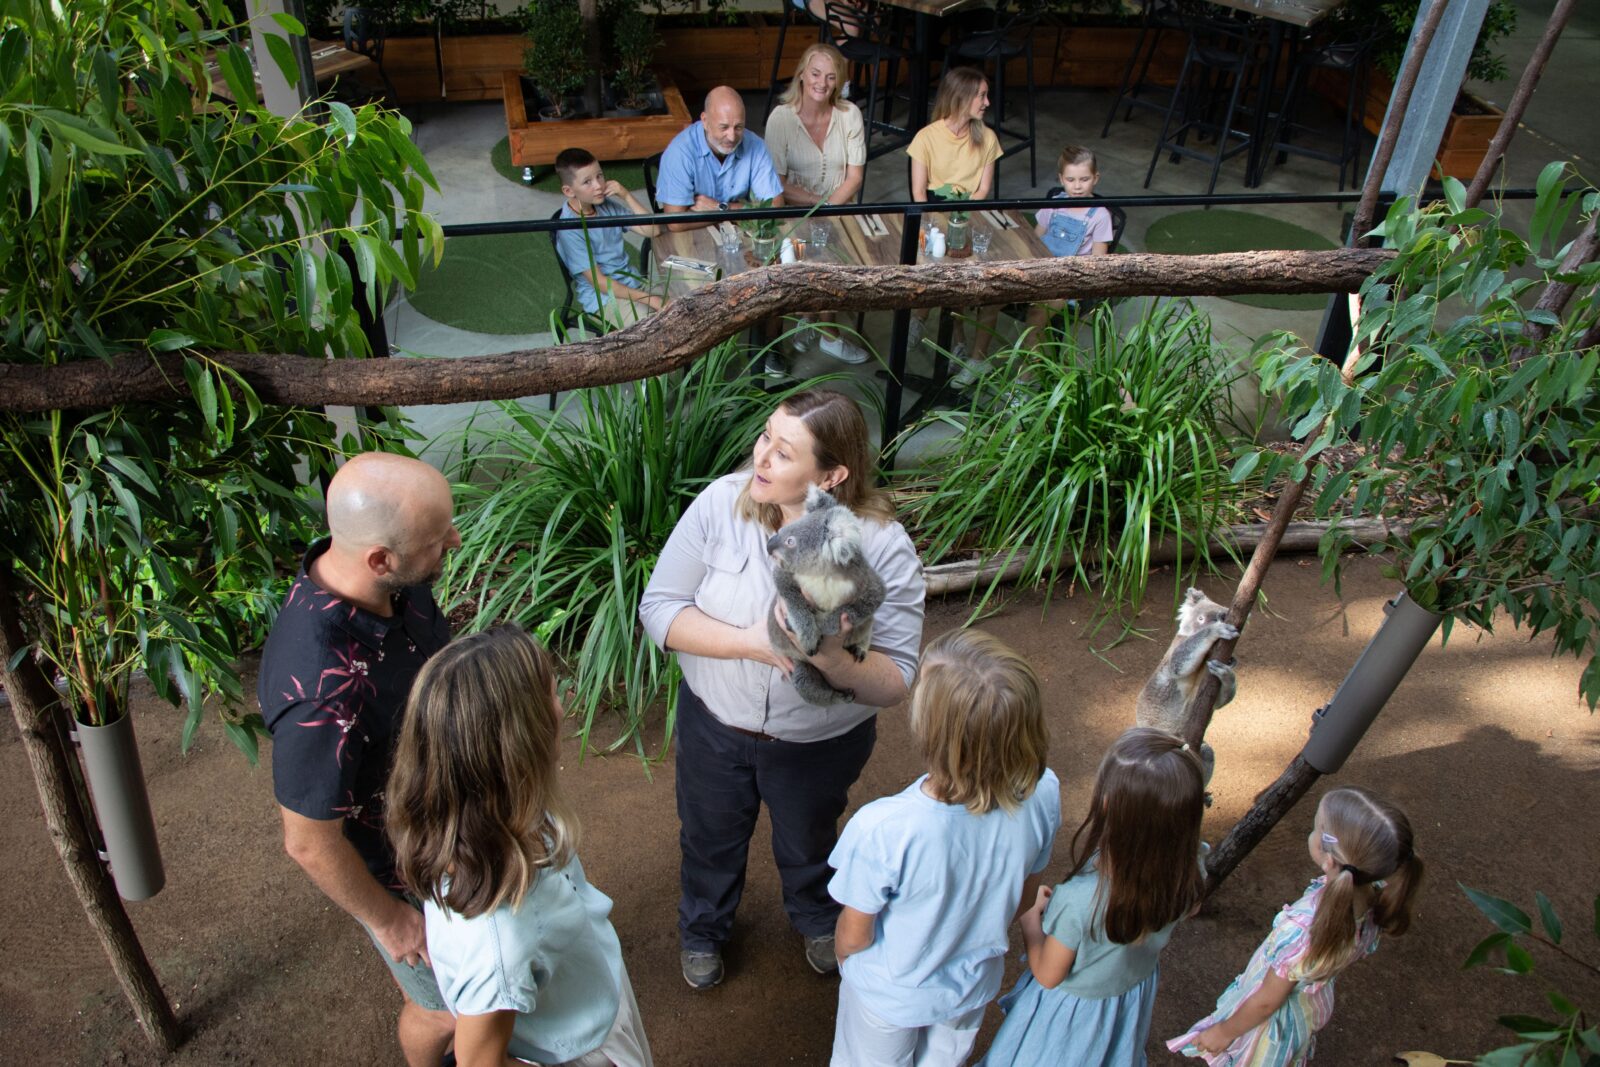 Keeper introduces guests to a Koala while family enjoys a food platter